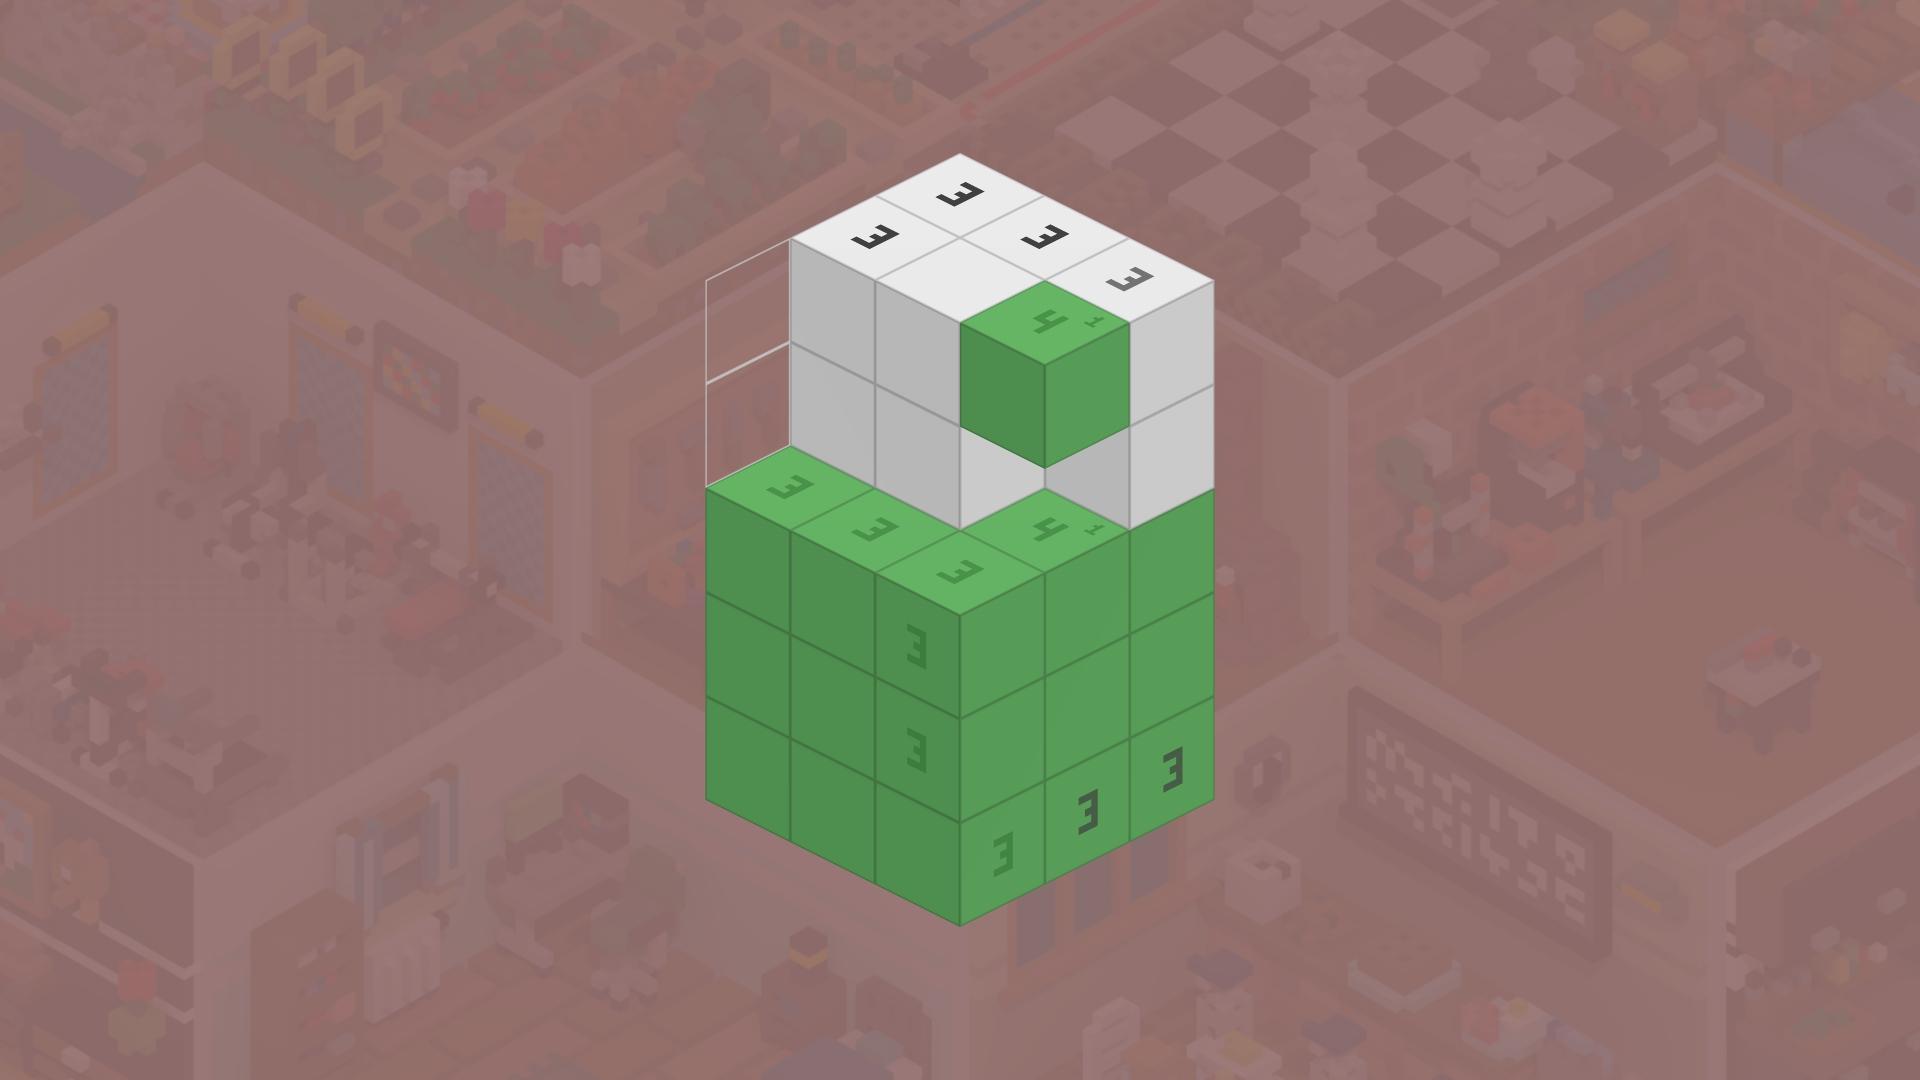 Download Voxelgram Android free game.